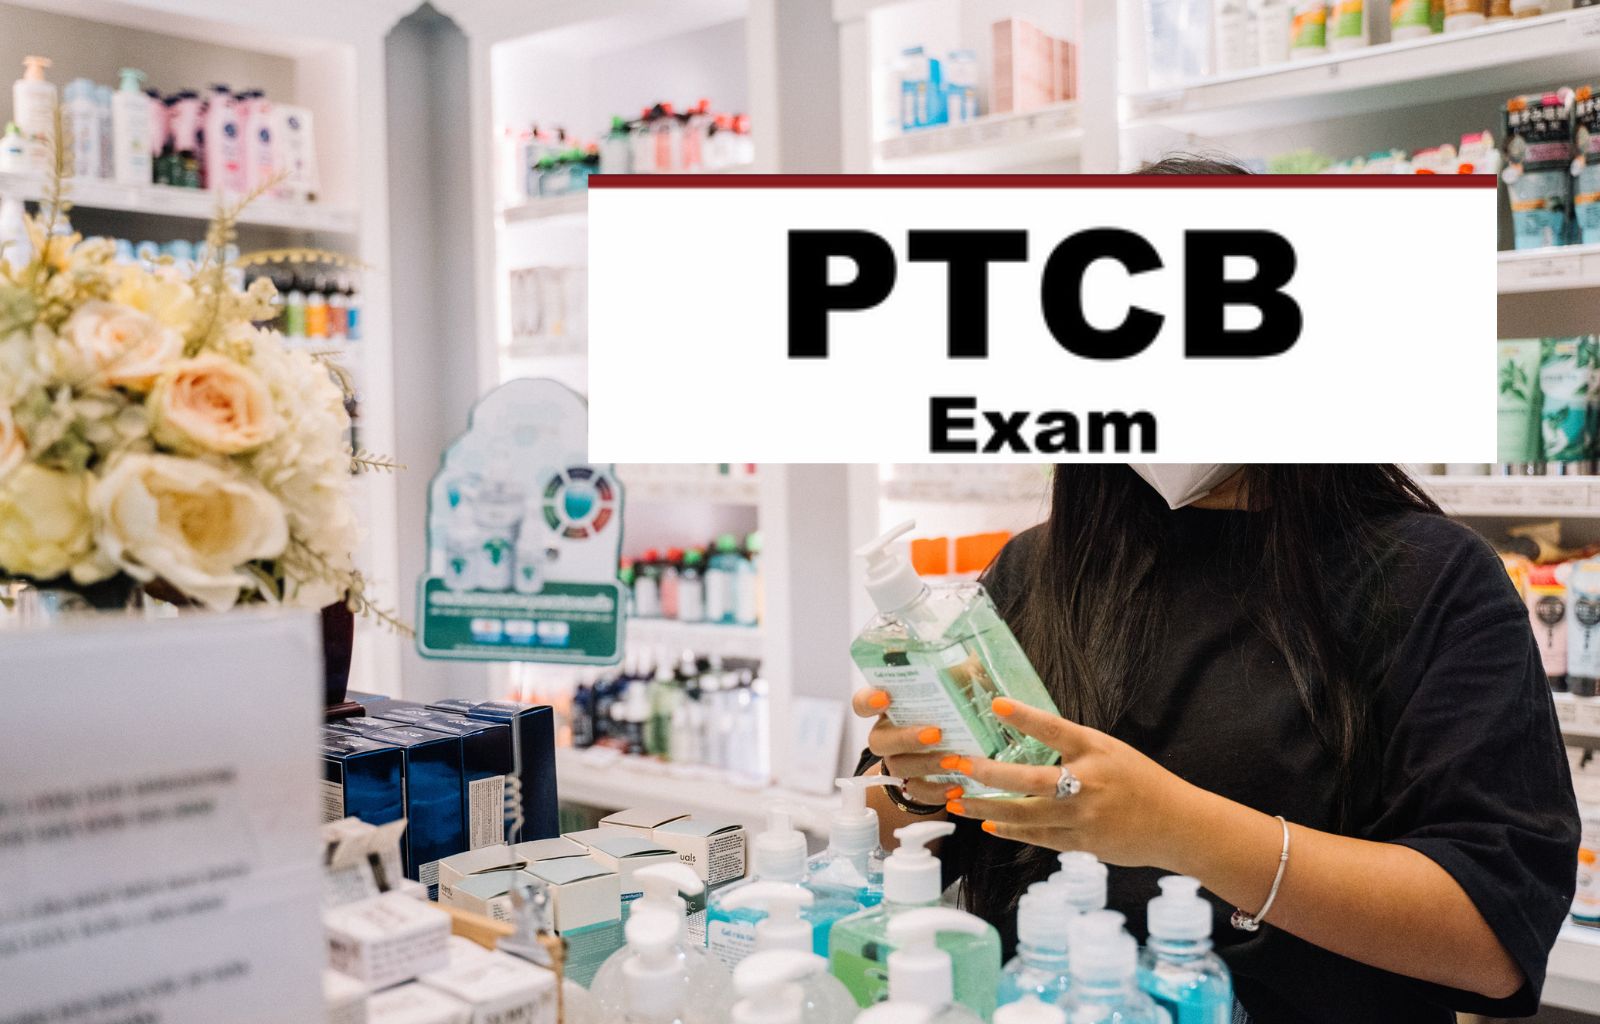 ¿How to Study For The PTCV Exam? Complete Guide